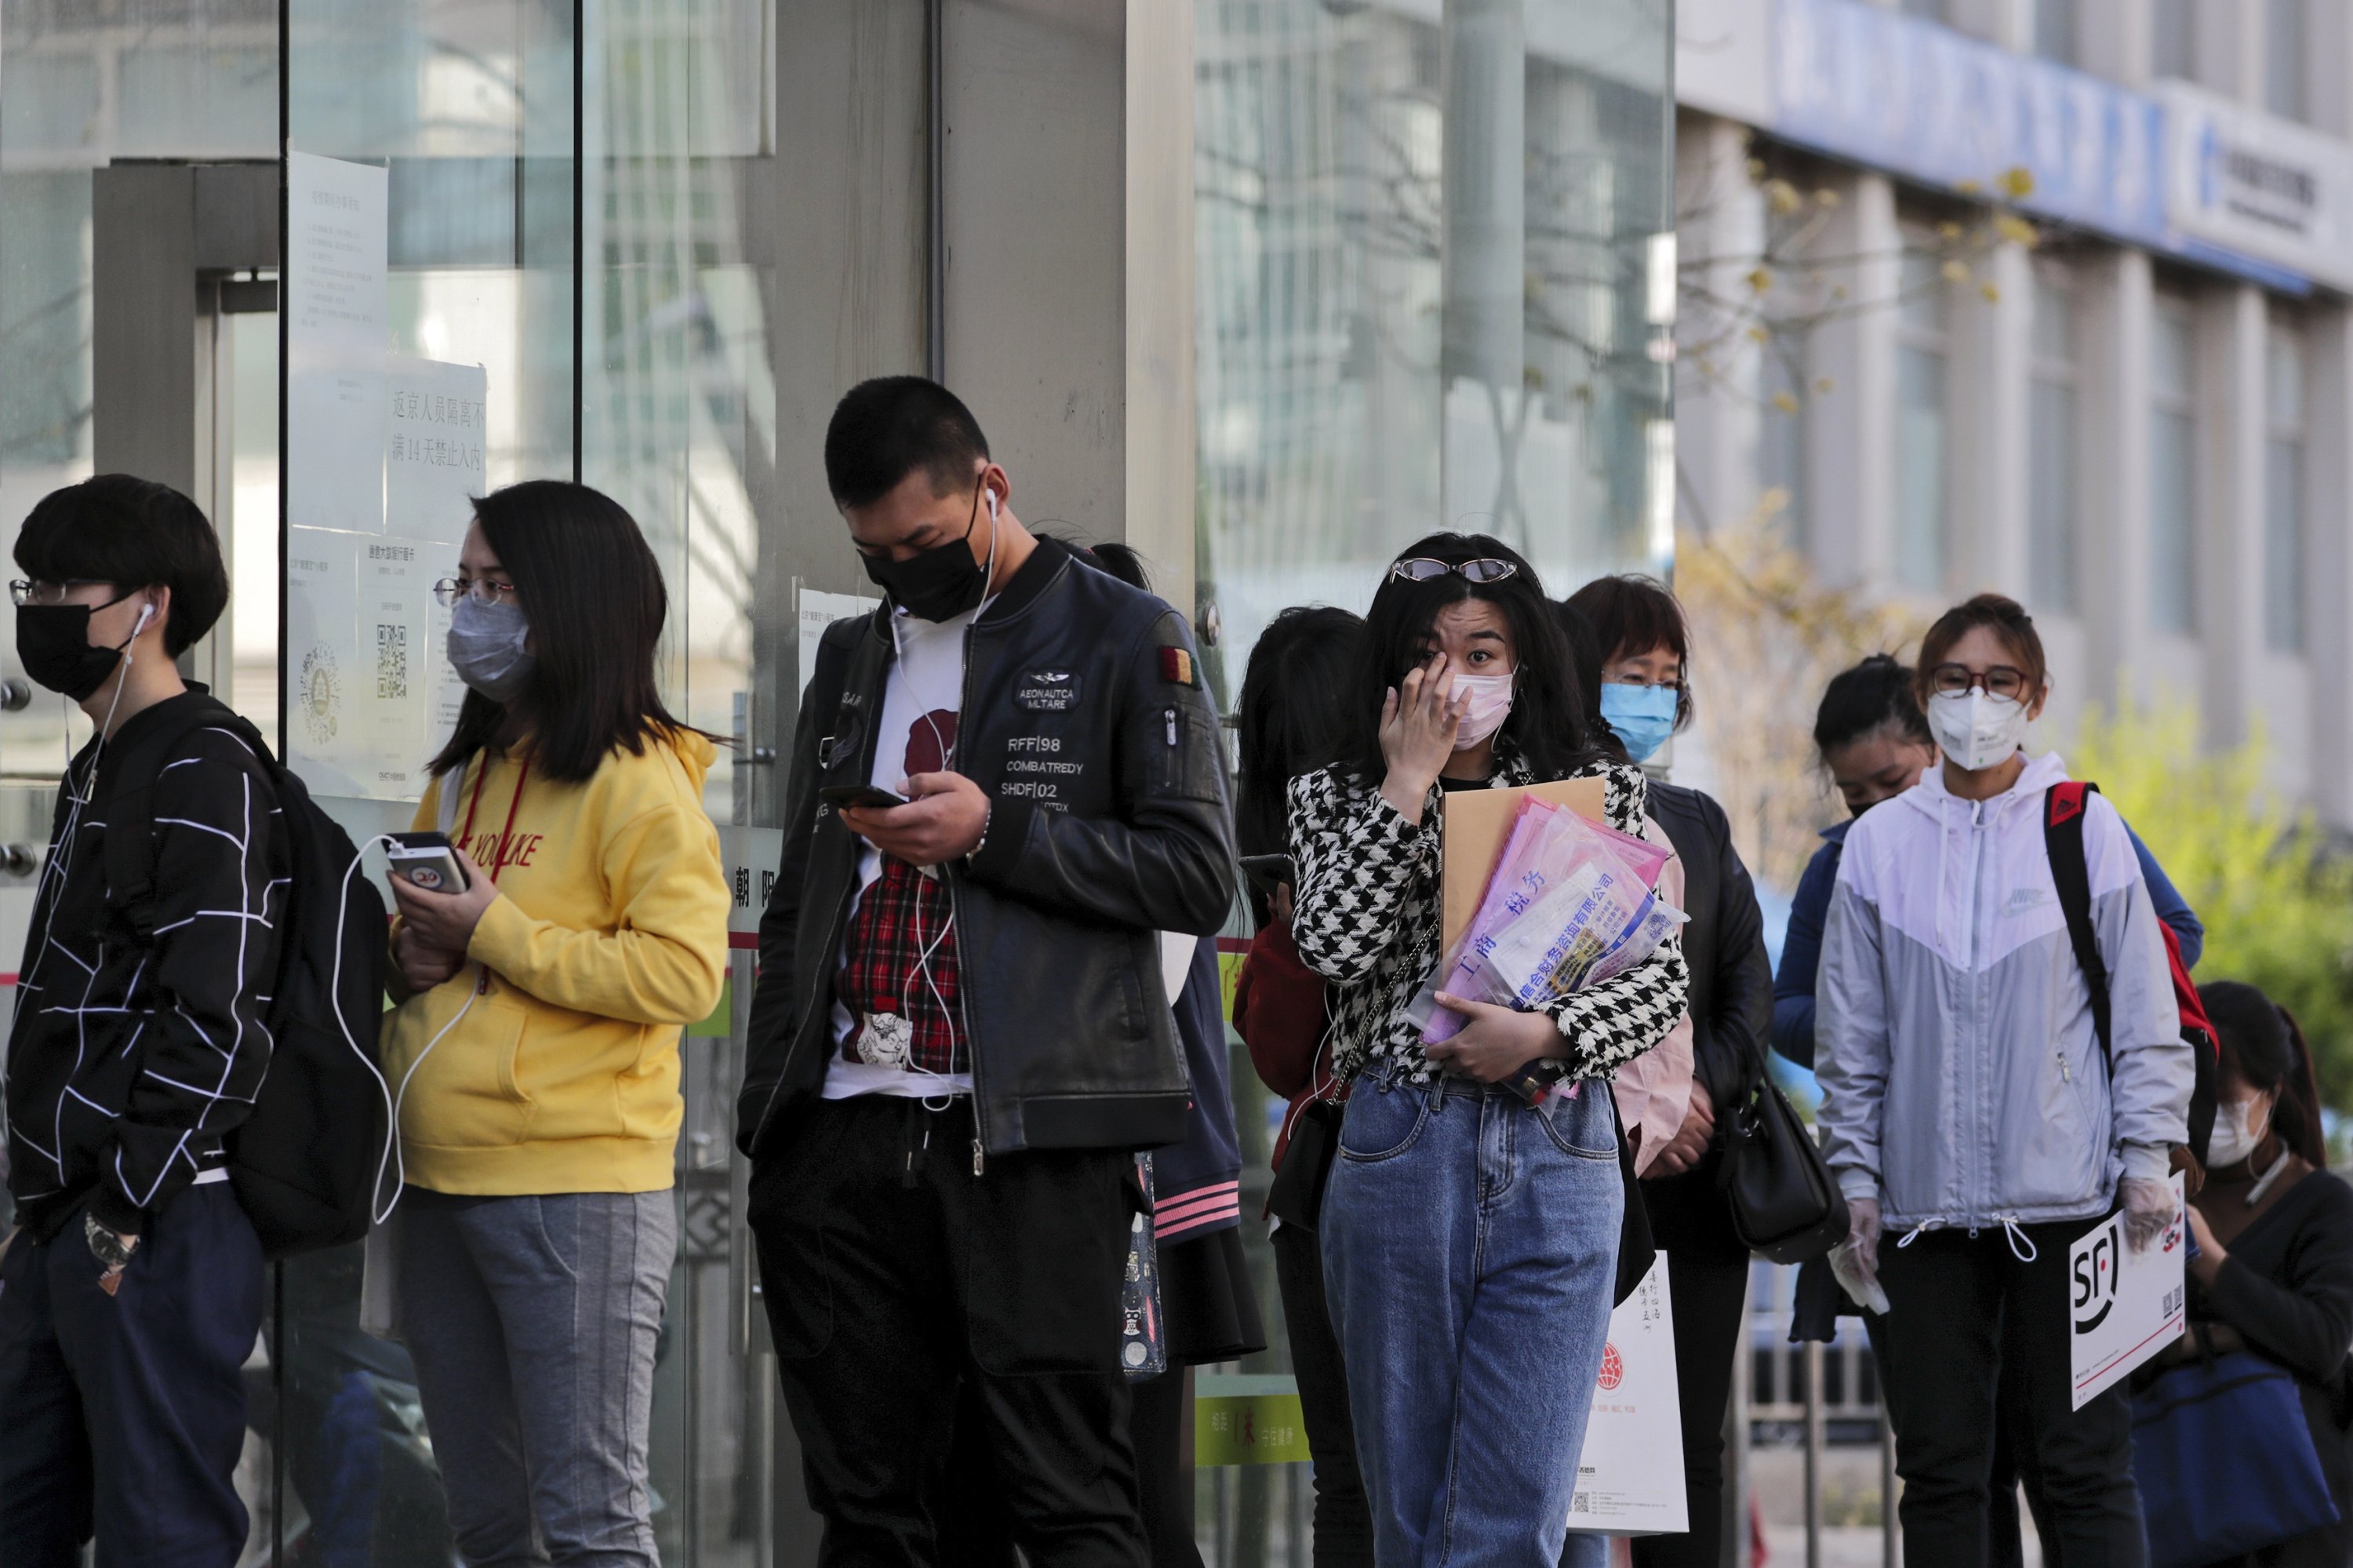 People wearing protective face masks wait in a queue to get temperature checks and a health code before entering an office building in Beijing, April 20, 2020. (AP Photo)